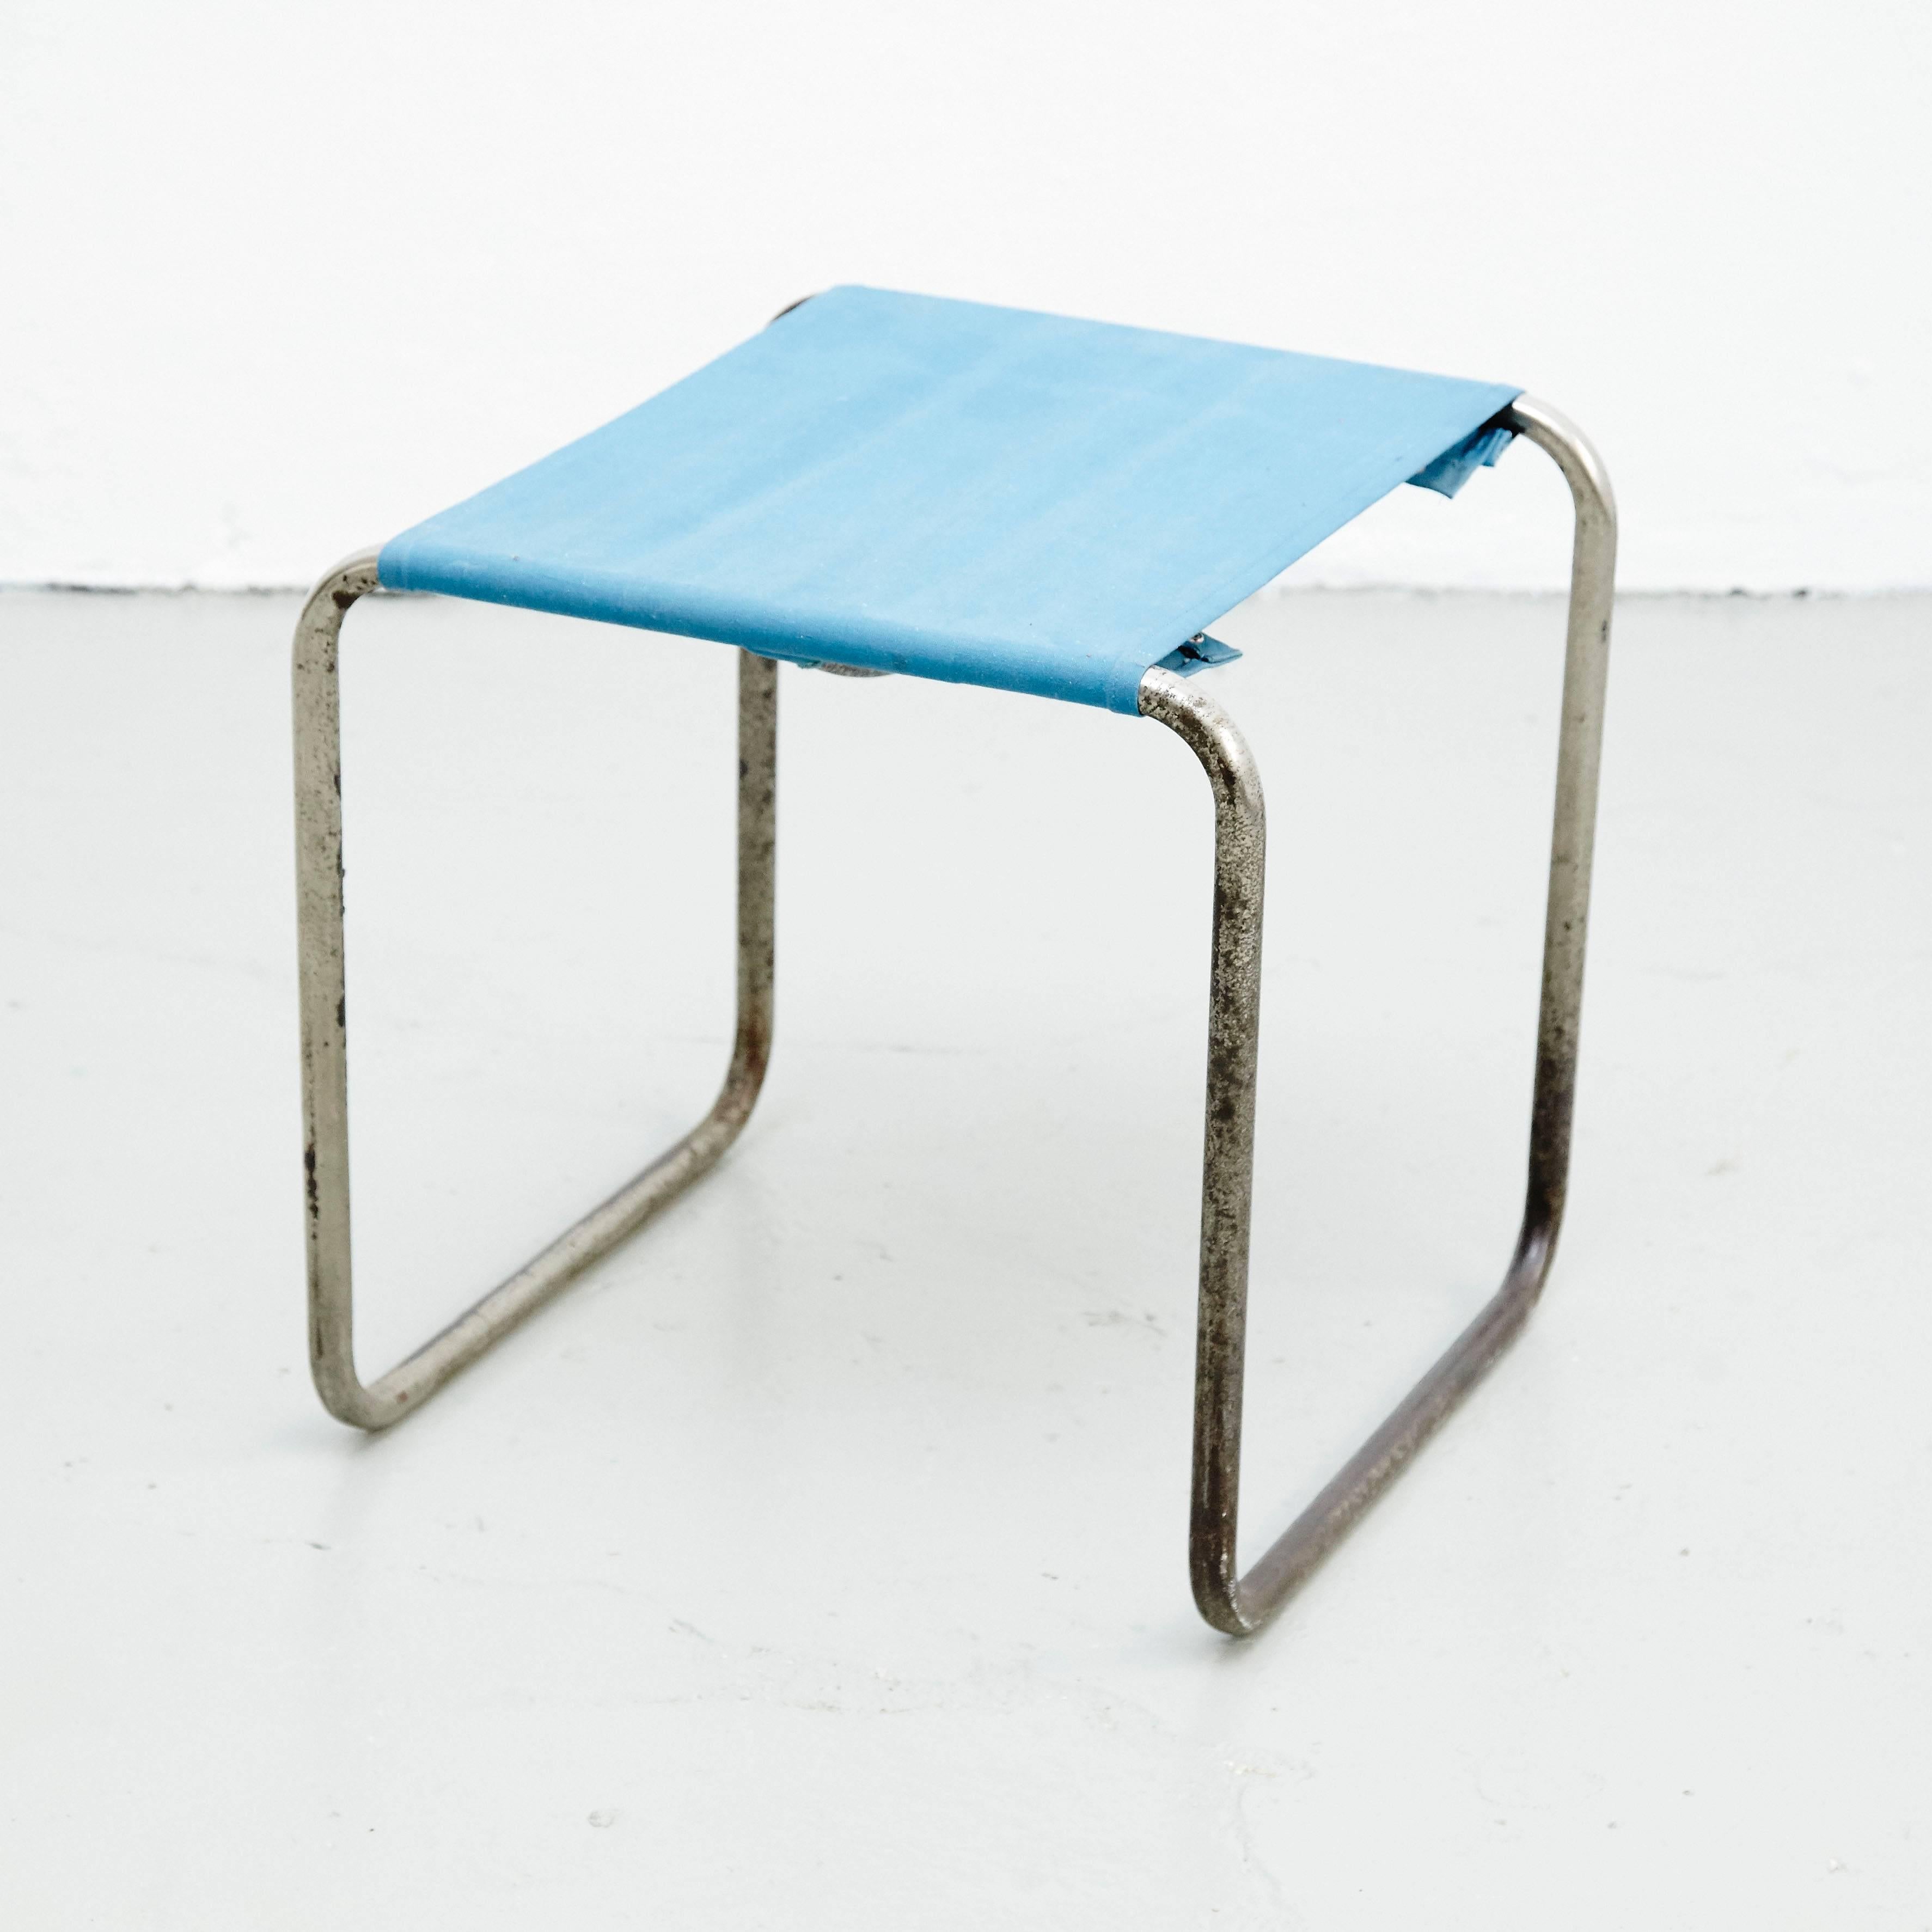 Stool designed by Marcel Breuer for Thonet, circa 1930

Tubular structure, fabric in blue.

In good original condition, with minor wear consistent with age and use, preserving a nice patina 

Marcel Lajos Breuer (1902–1981), was a